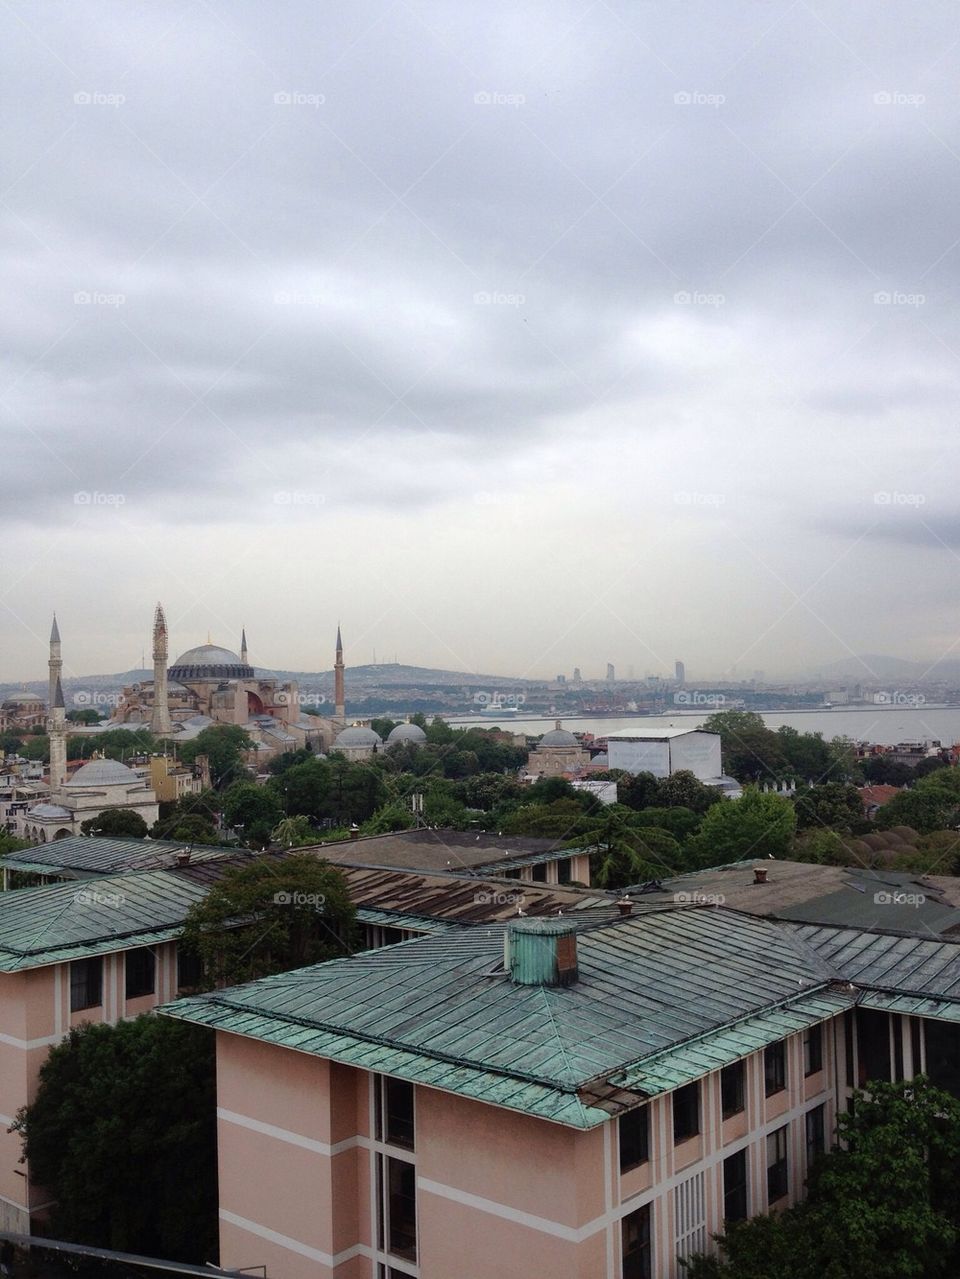 Cloudy day over the Hagia Sophia